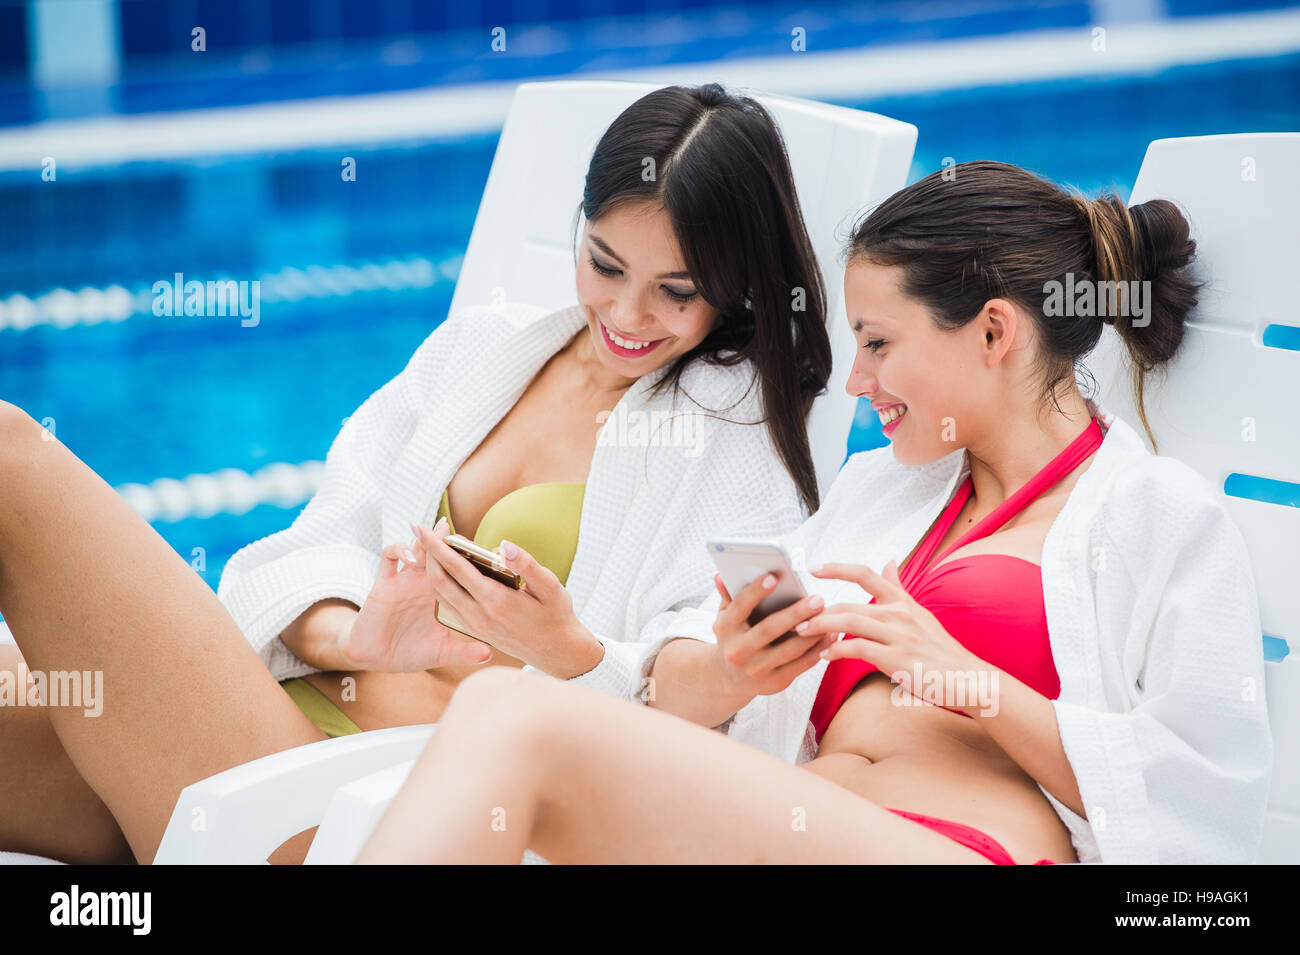 Young girls friends messaging with friend on her smartphone. Relaxation spa and technology social networks concept. Stock Photo